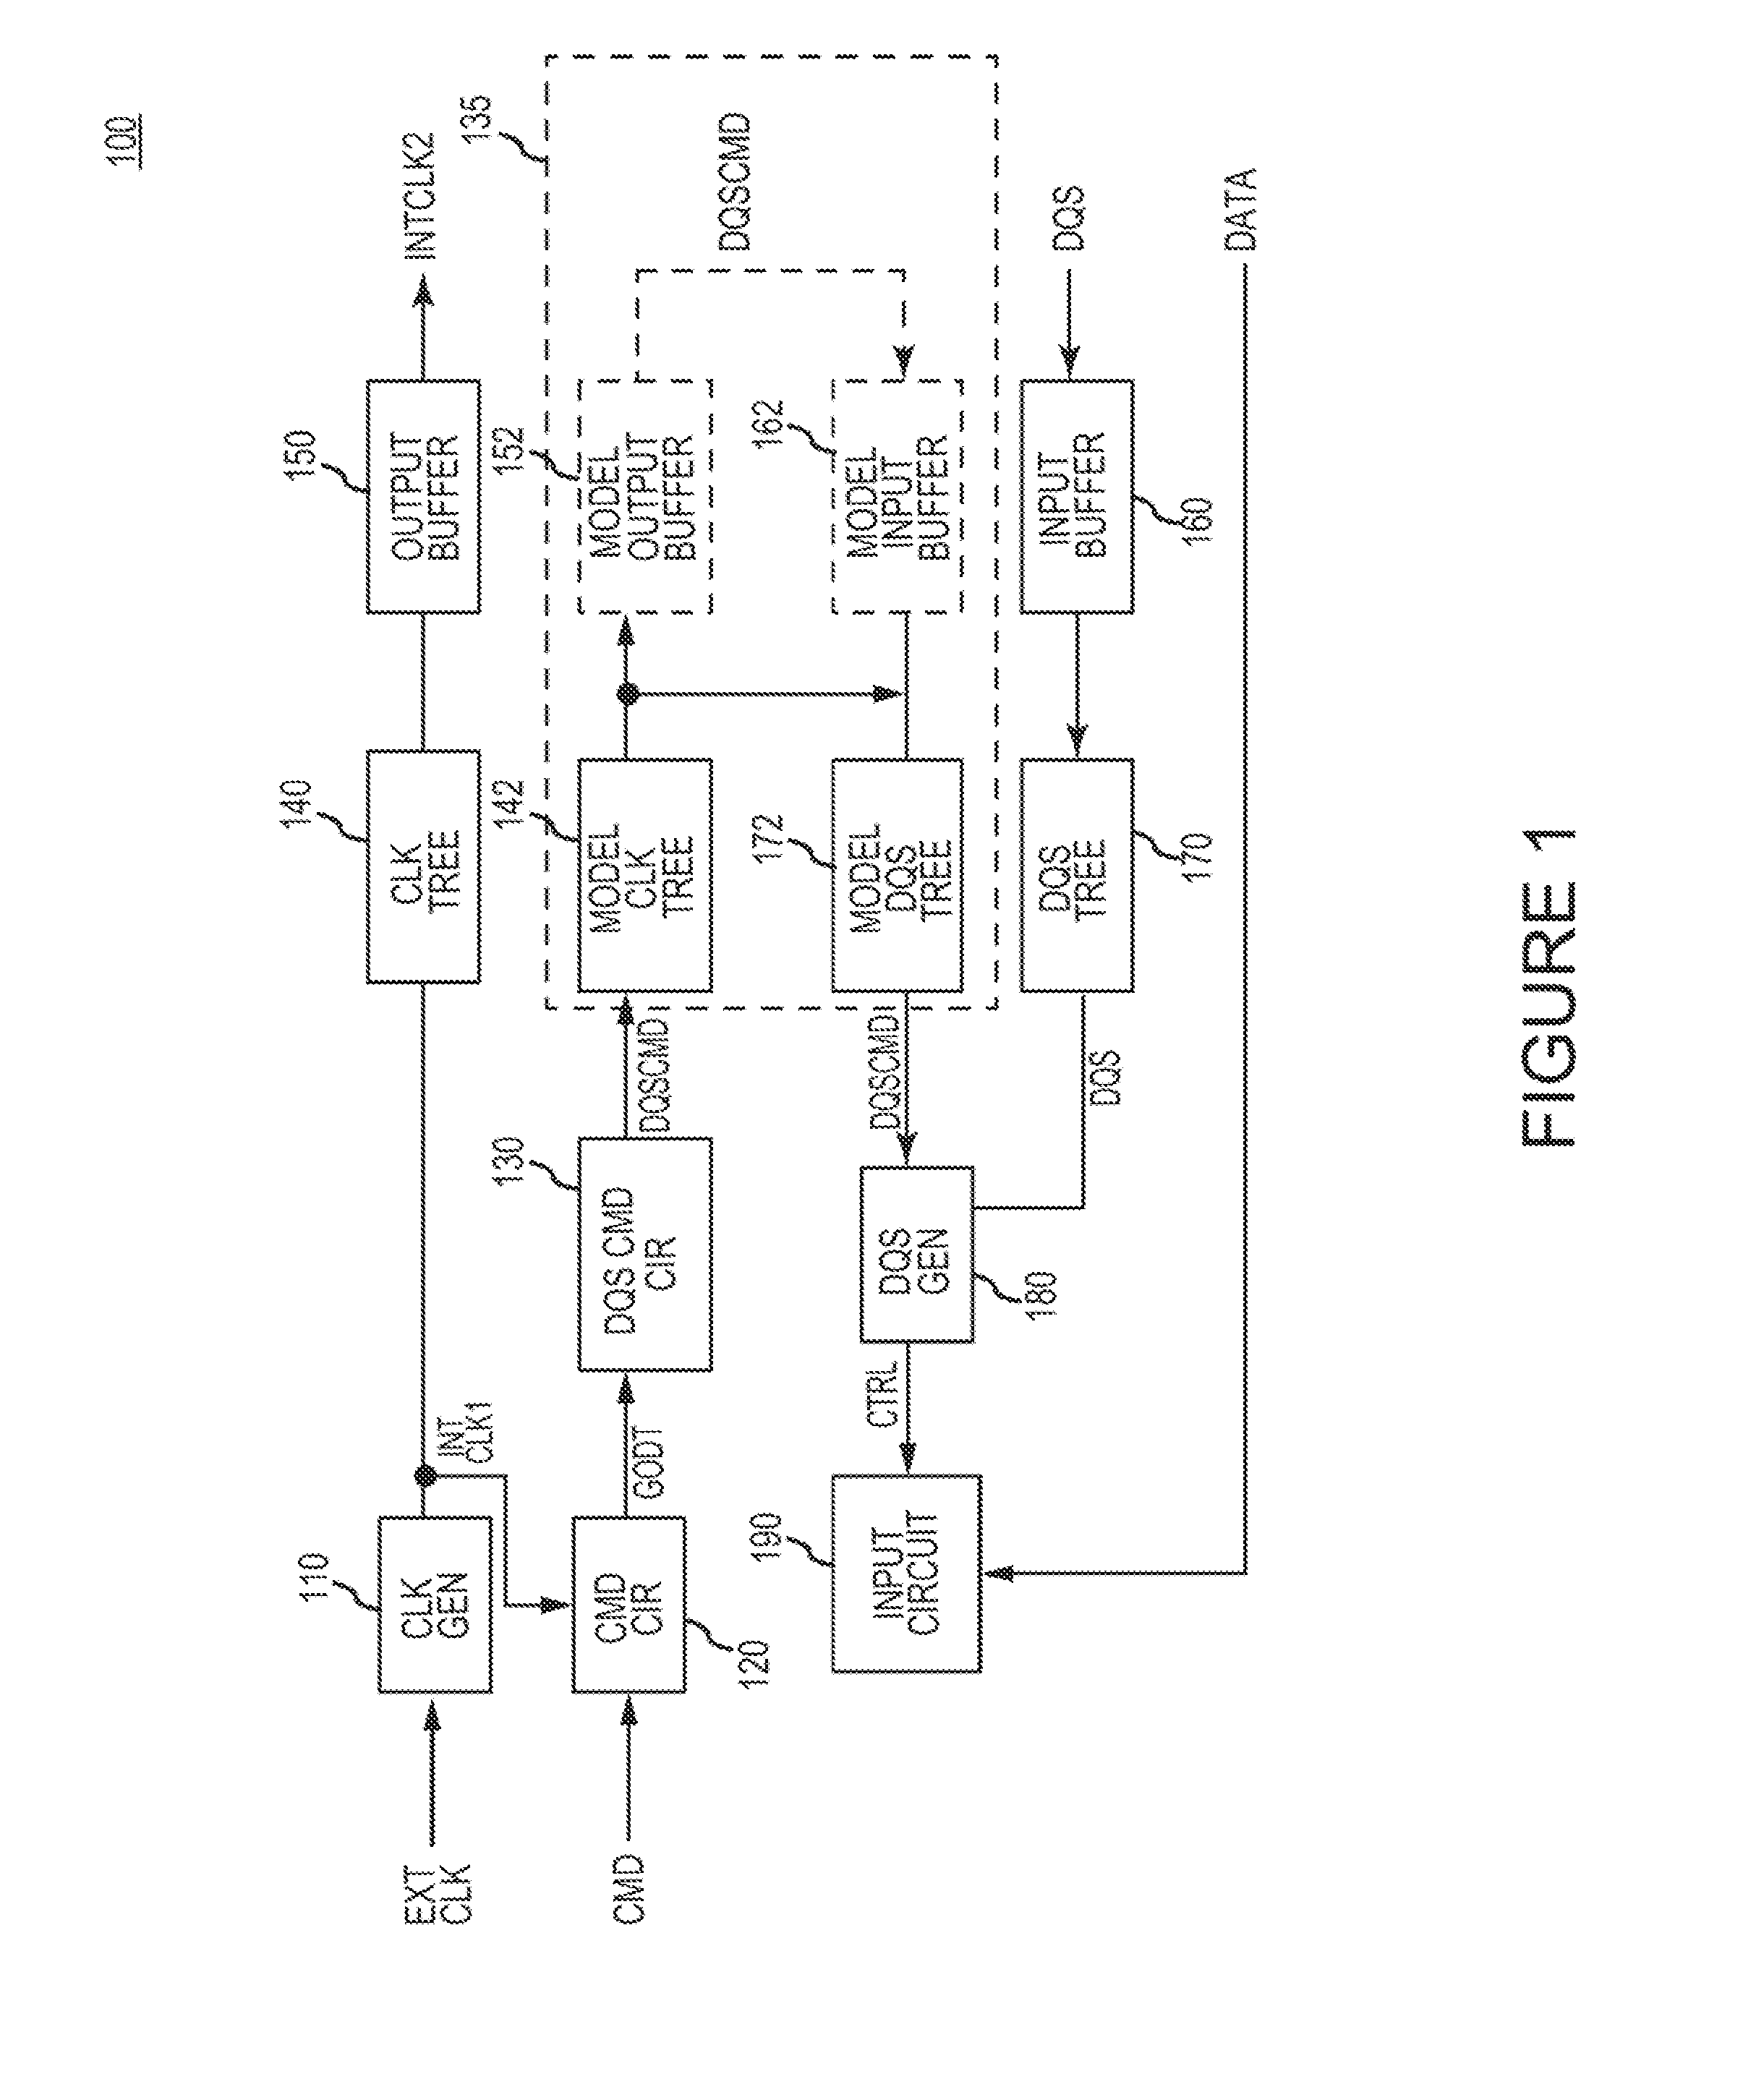 Apparatuses and methods for timing provision of a command to input circuitry